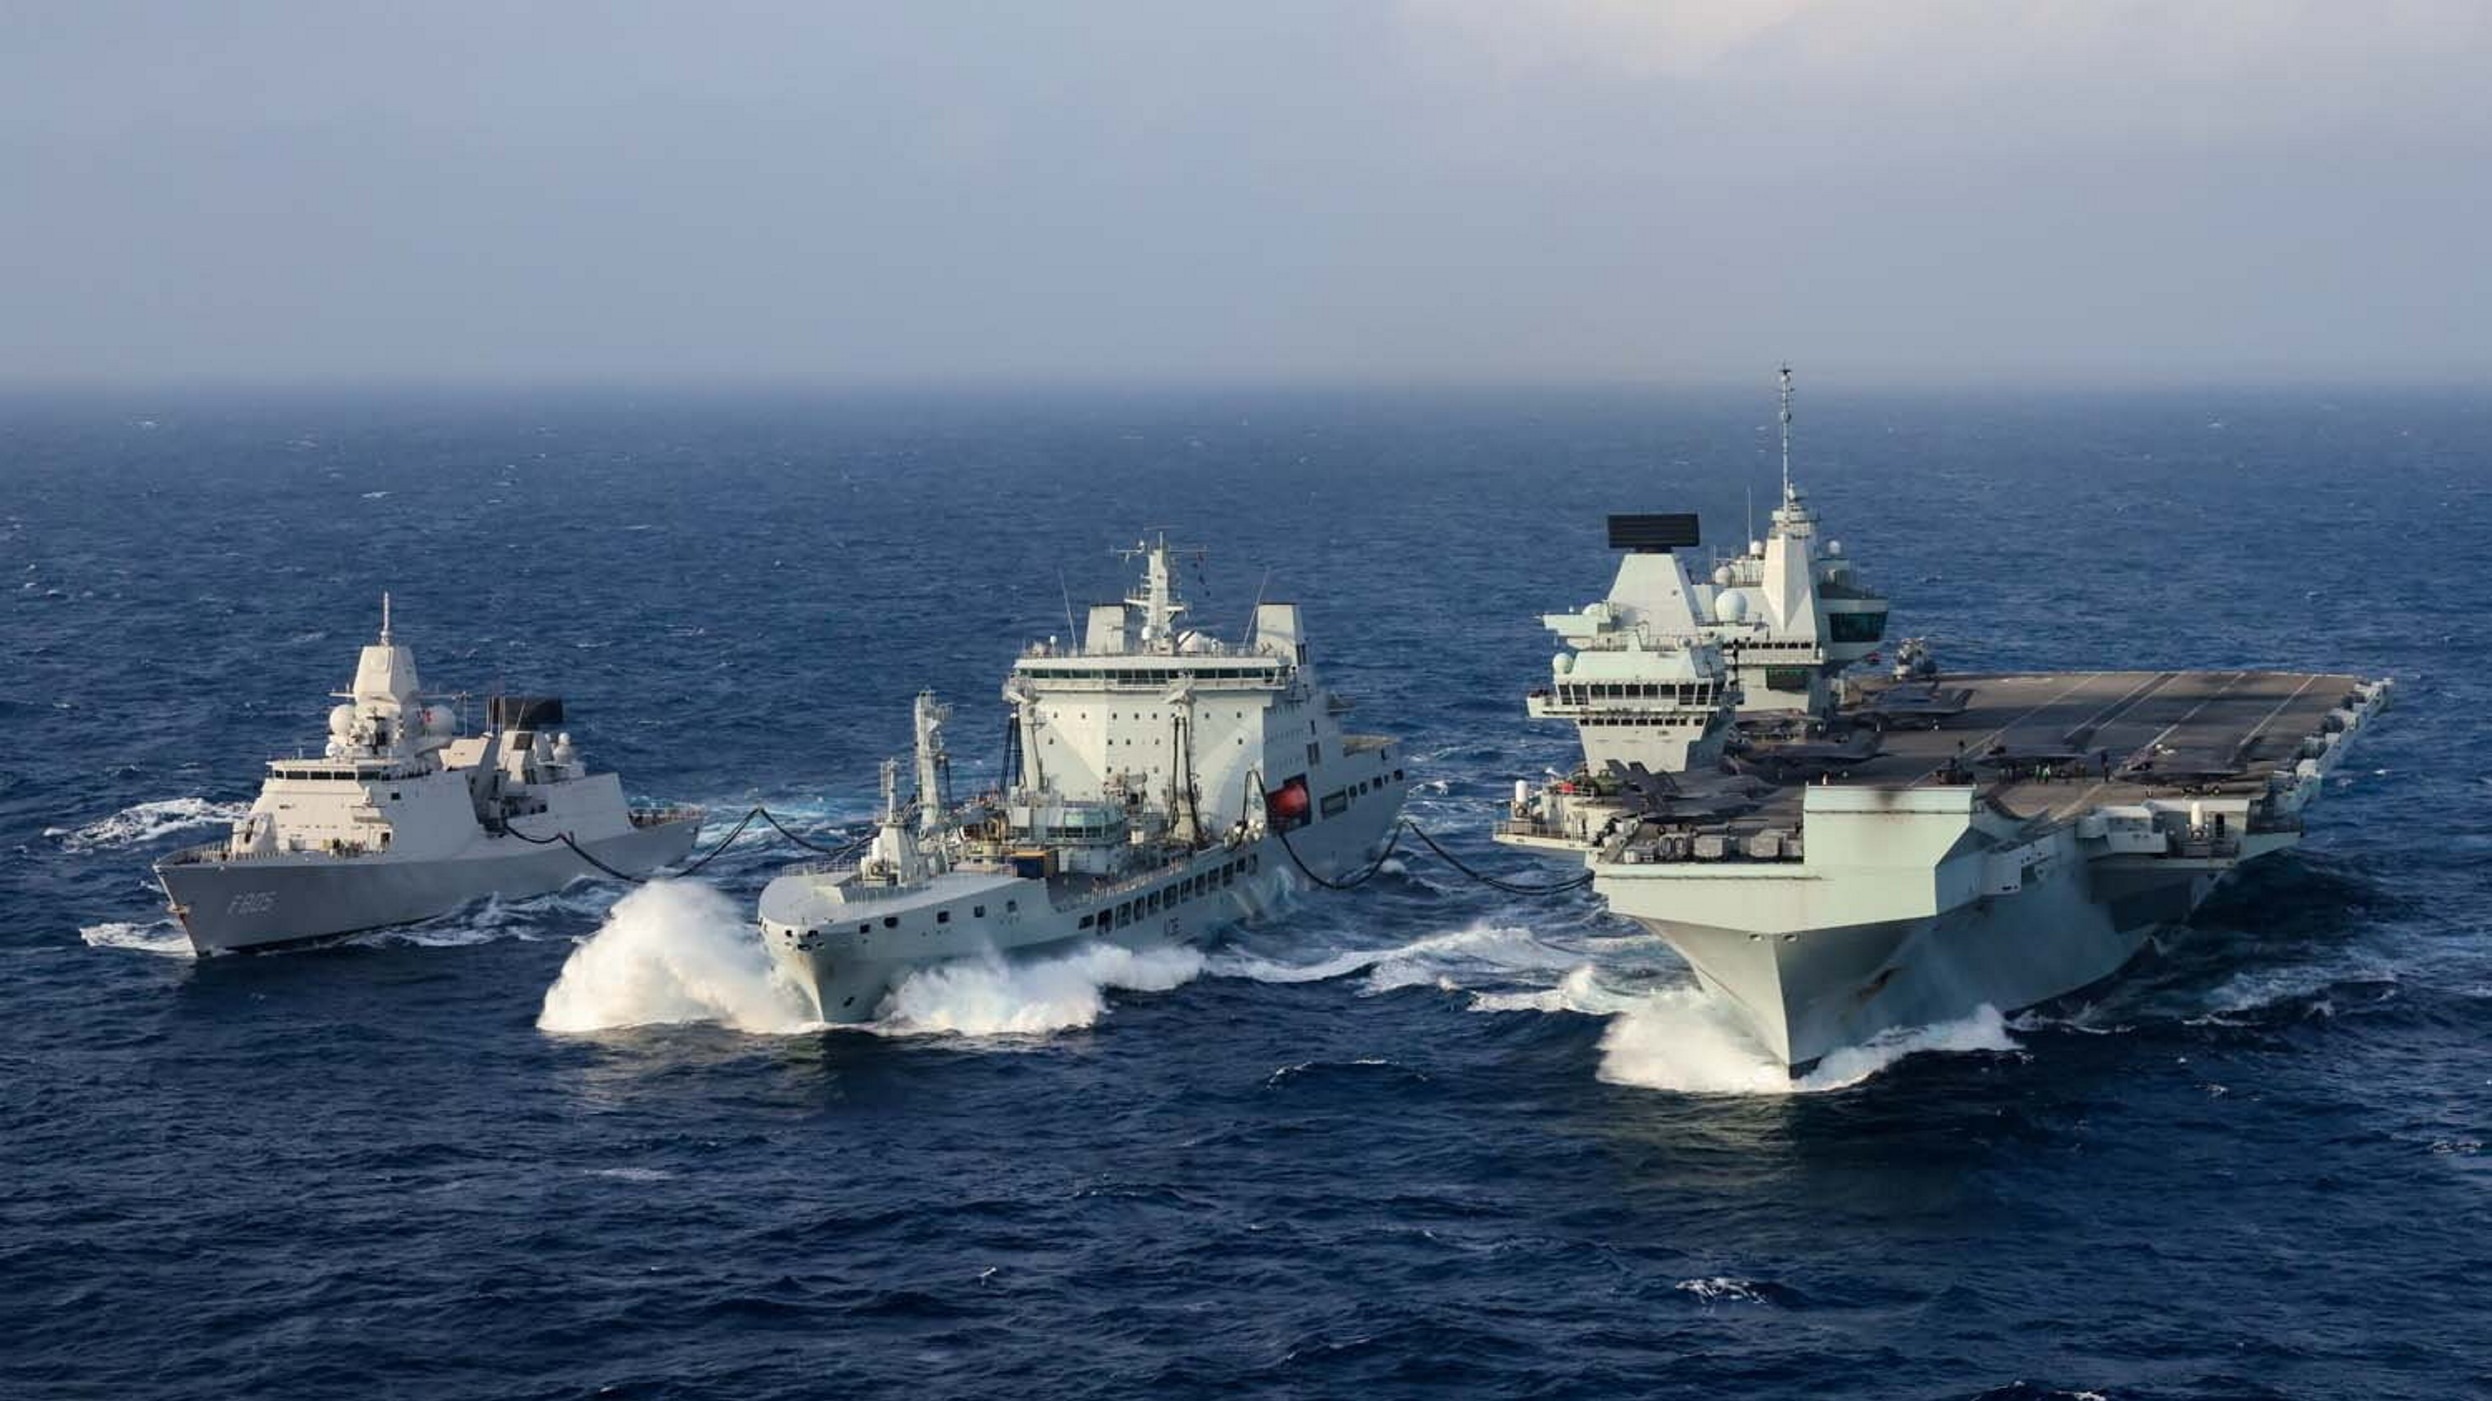 UK awards £1.6bn Royal Navy contract to Spanish-led consortium